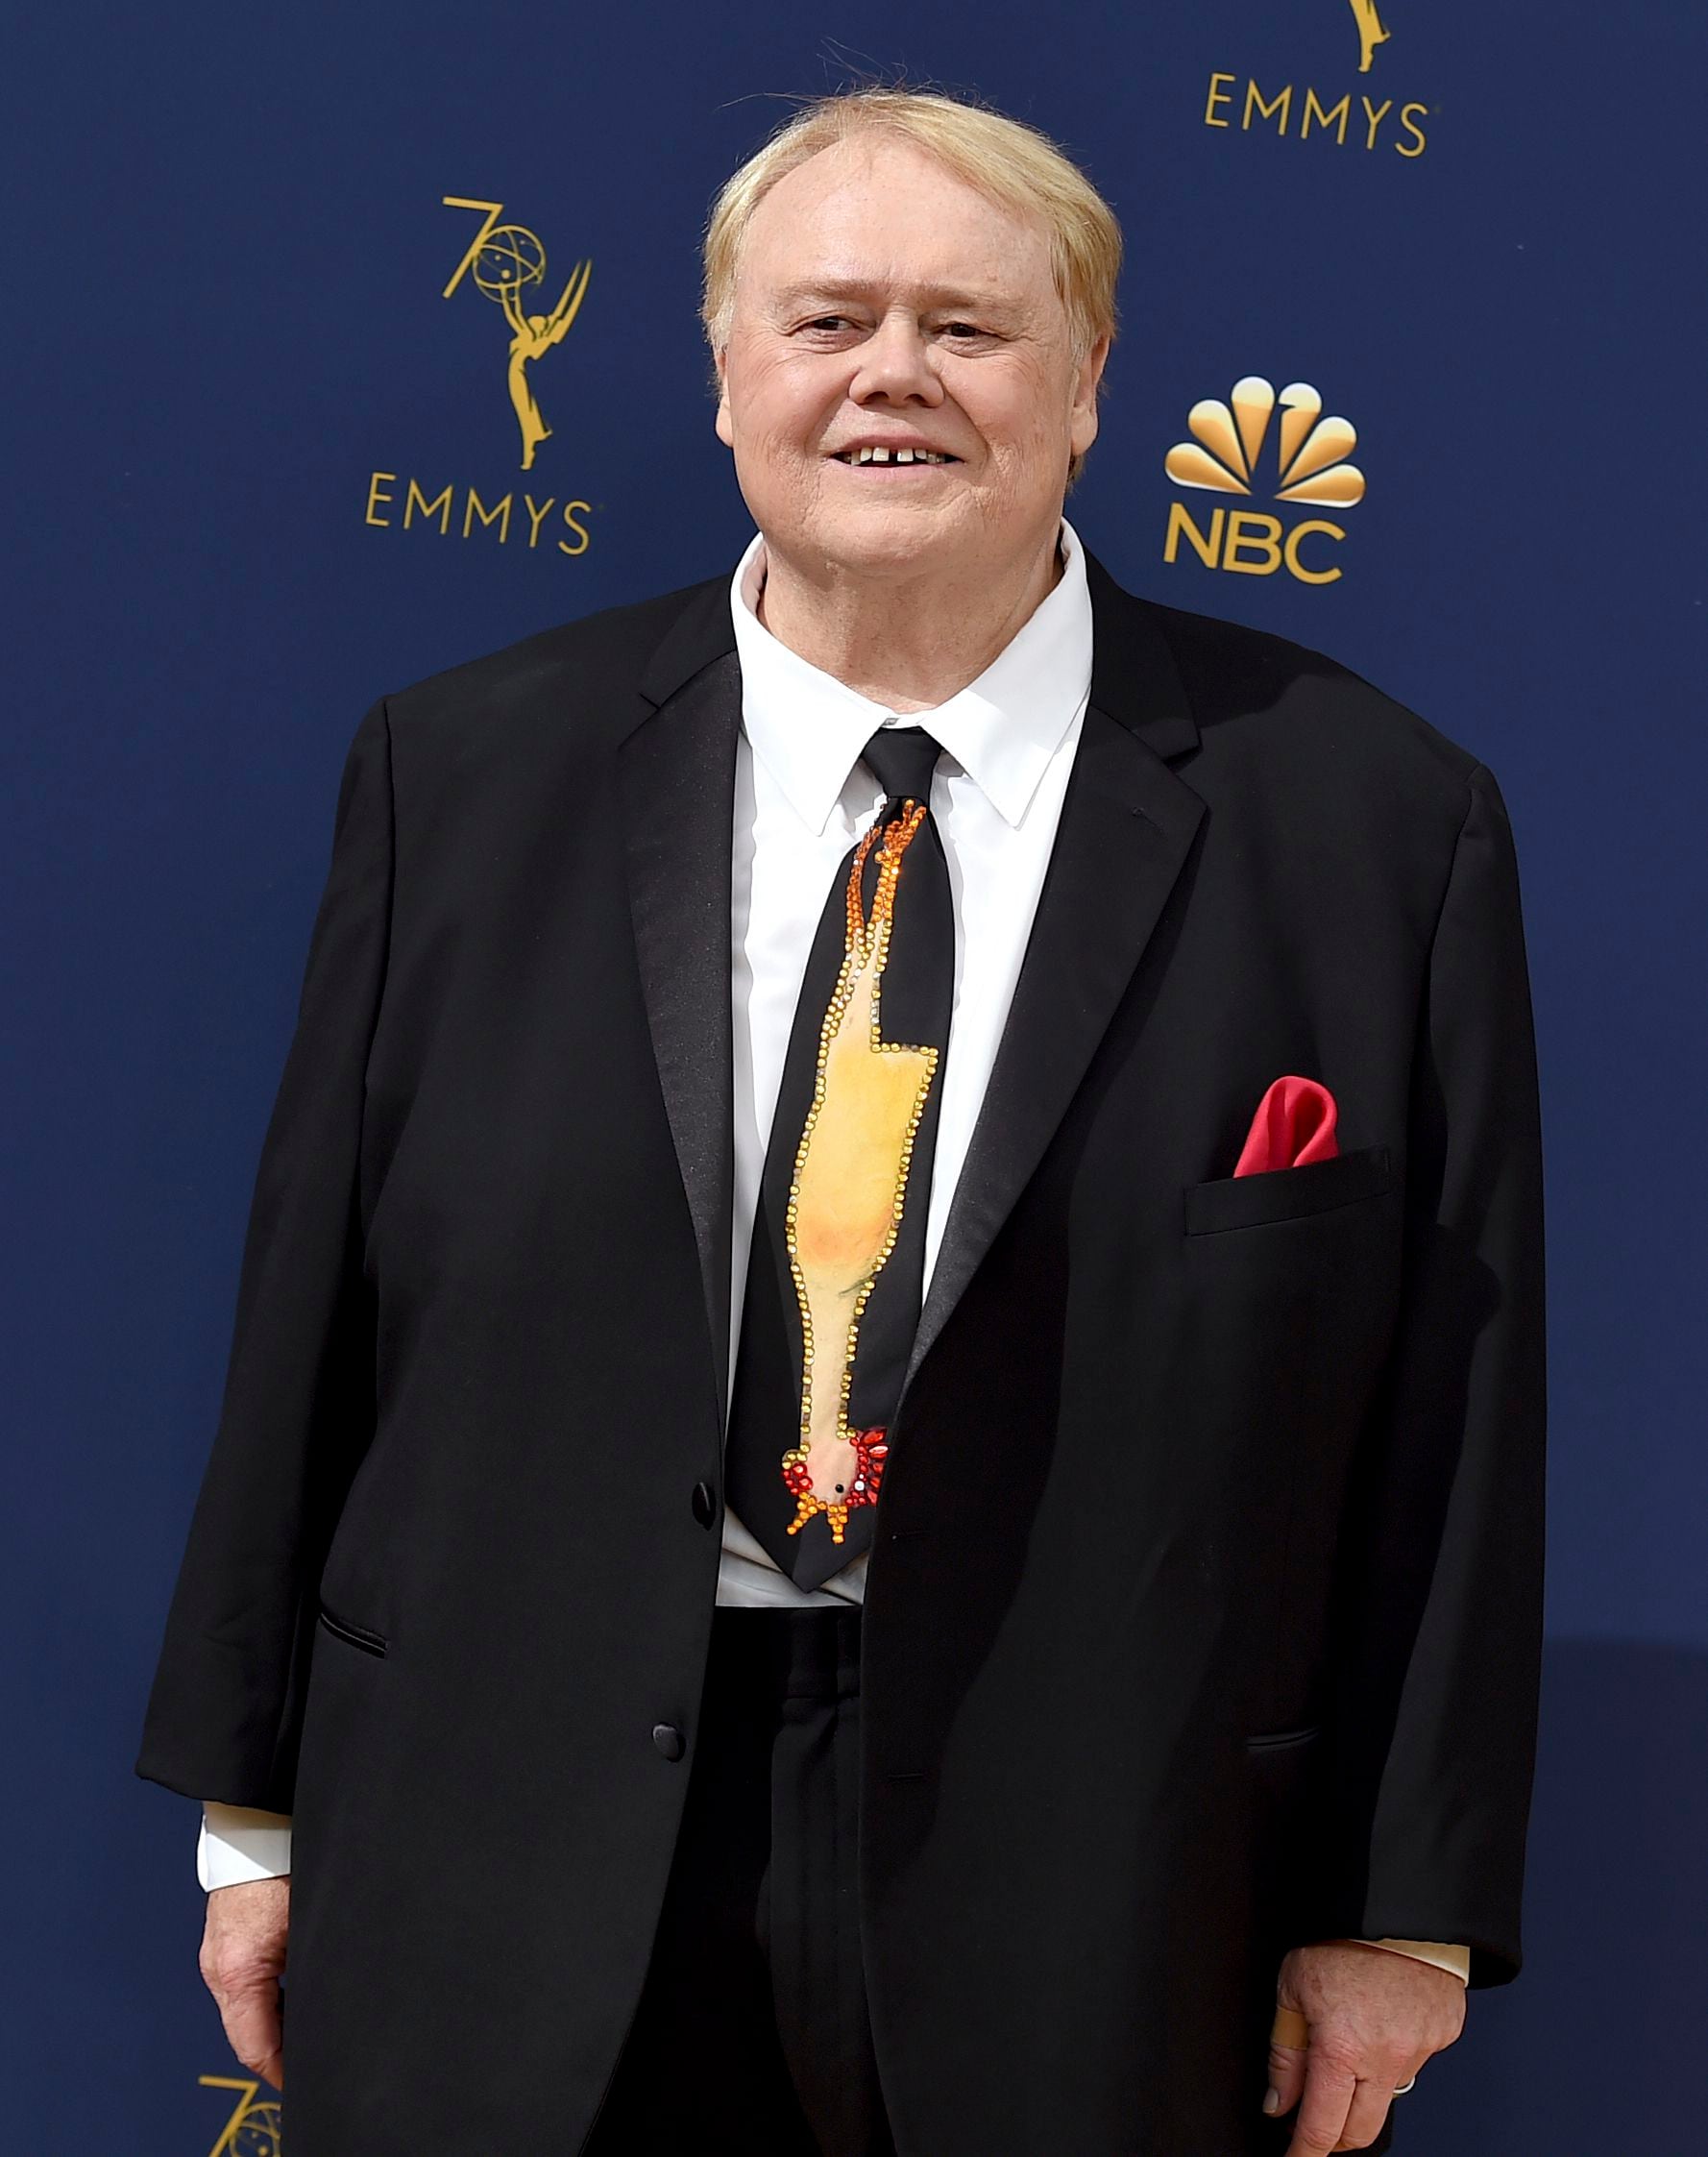 Louie Anderson, comic, Emmy winner for ‘Baskets,’ dies at 68